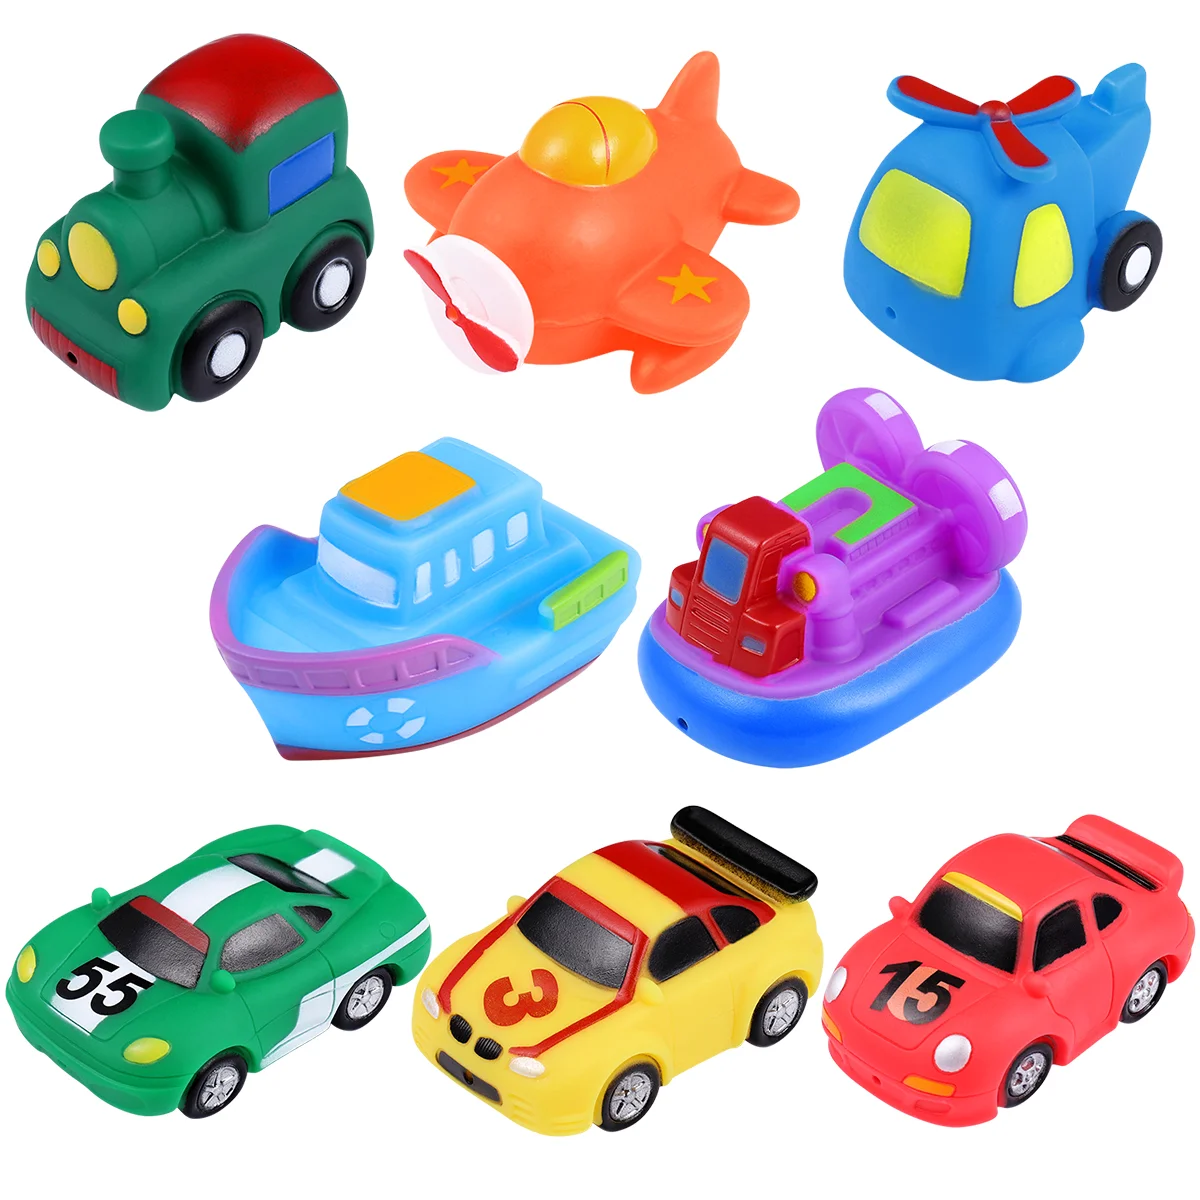 

Squirter Bath, Water Floating Squeeze Sound Bathtub Squirter, Vehicle Aircraft Swimming Bath Toys for Kids 8pcs